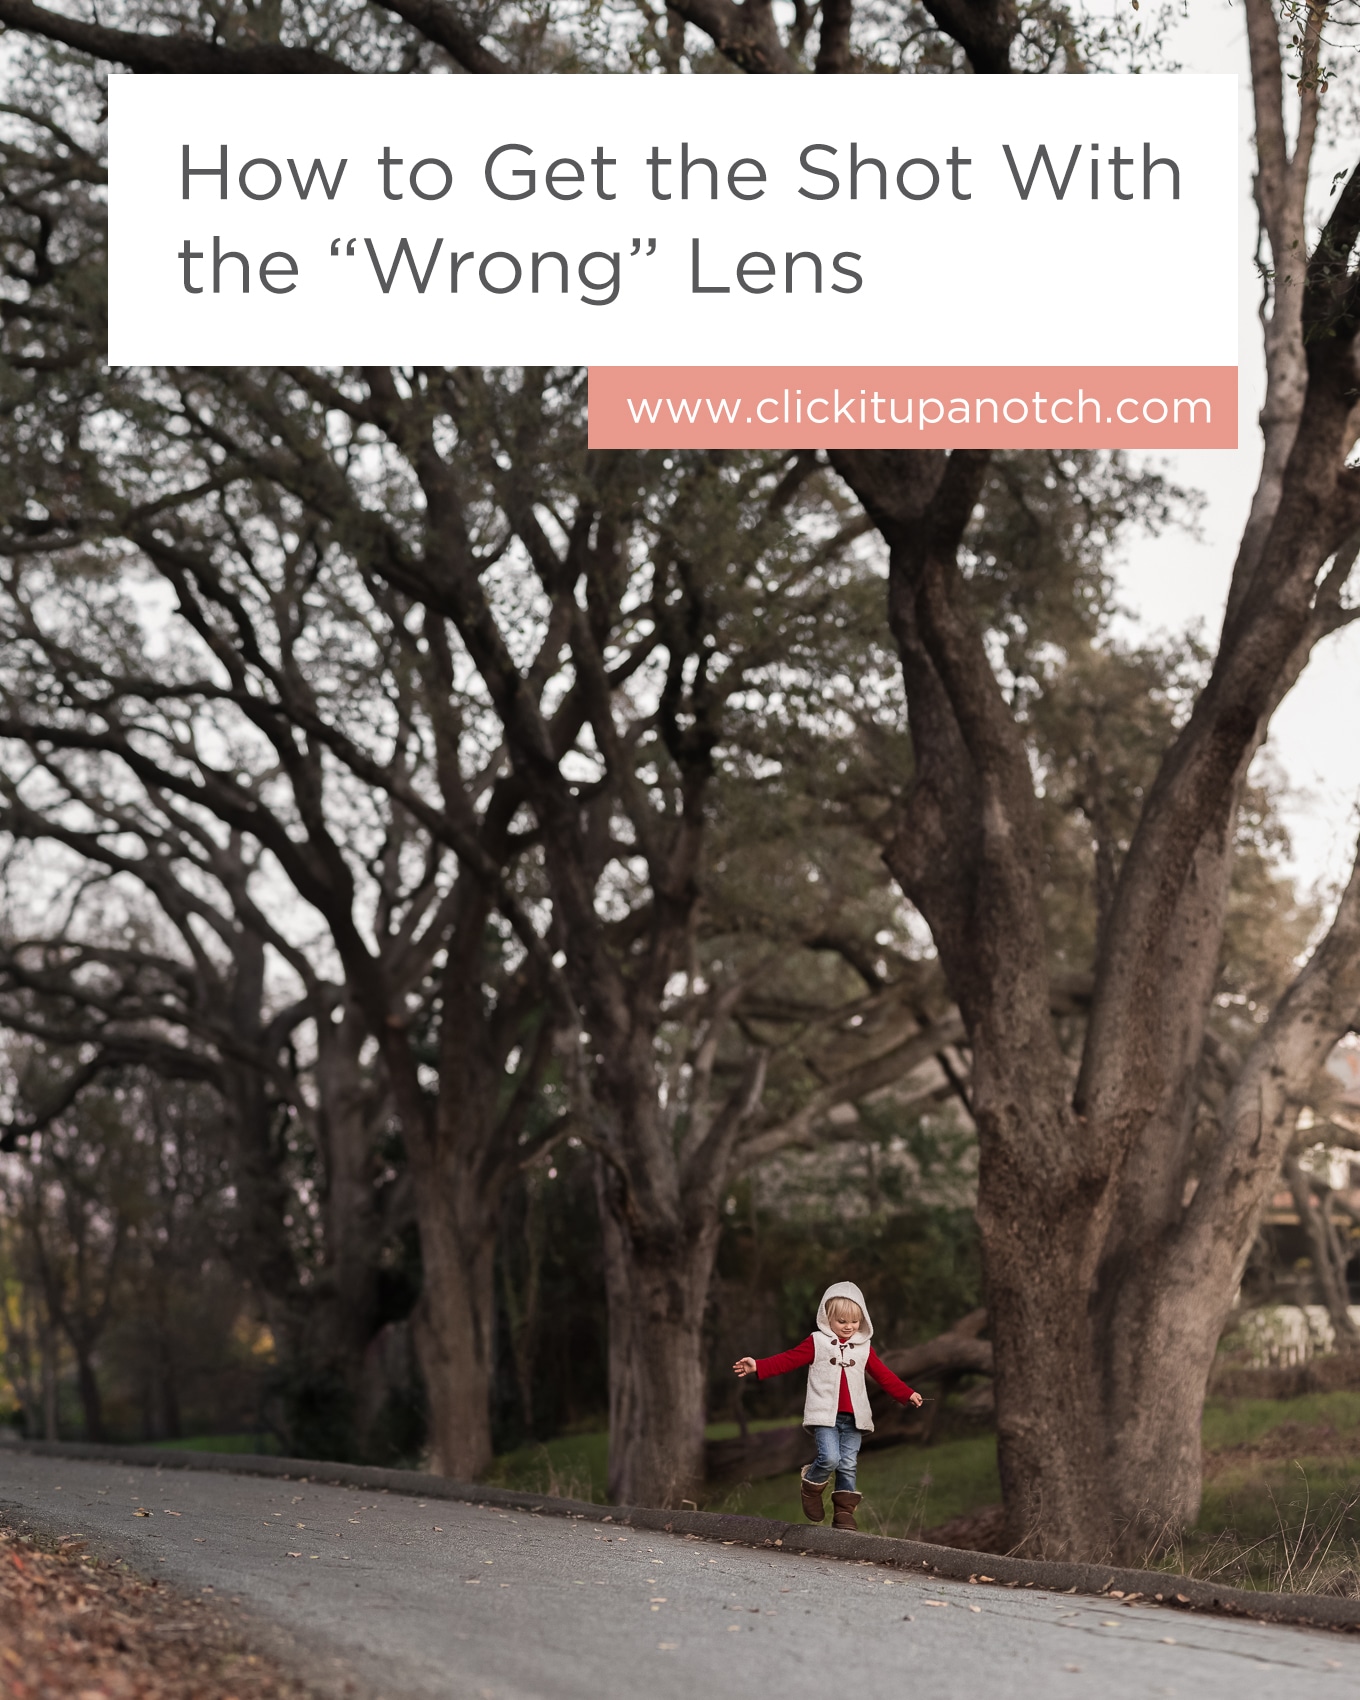 This is a great post if you don't have a lot of lenses! Read - "Photo Merging: How to Get the Shot With the "Wrong" Lens"